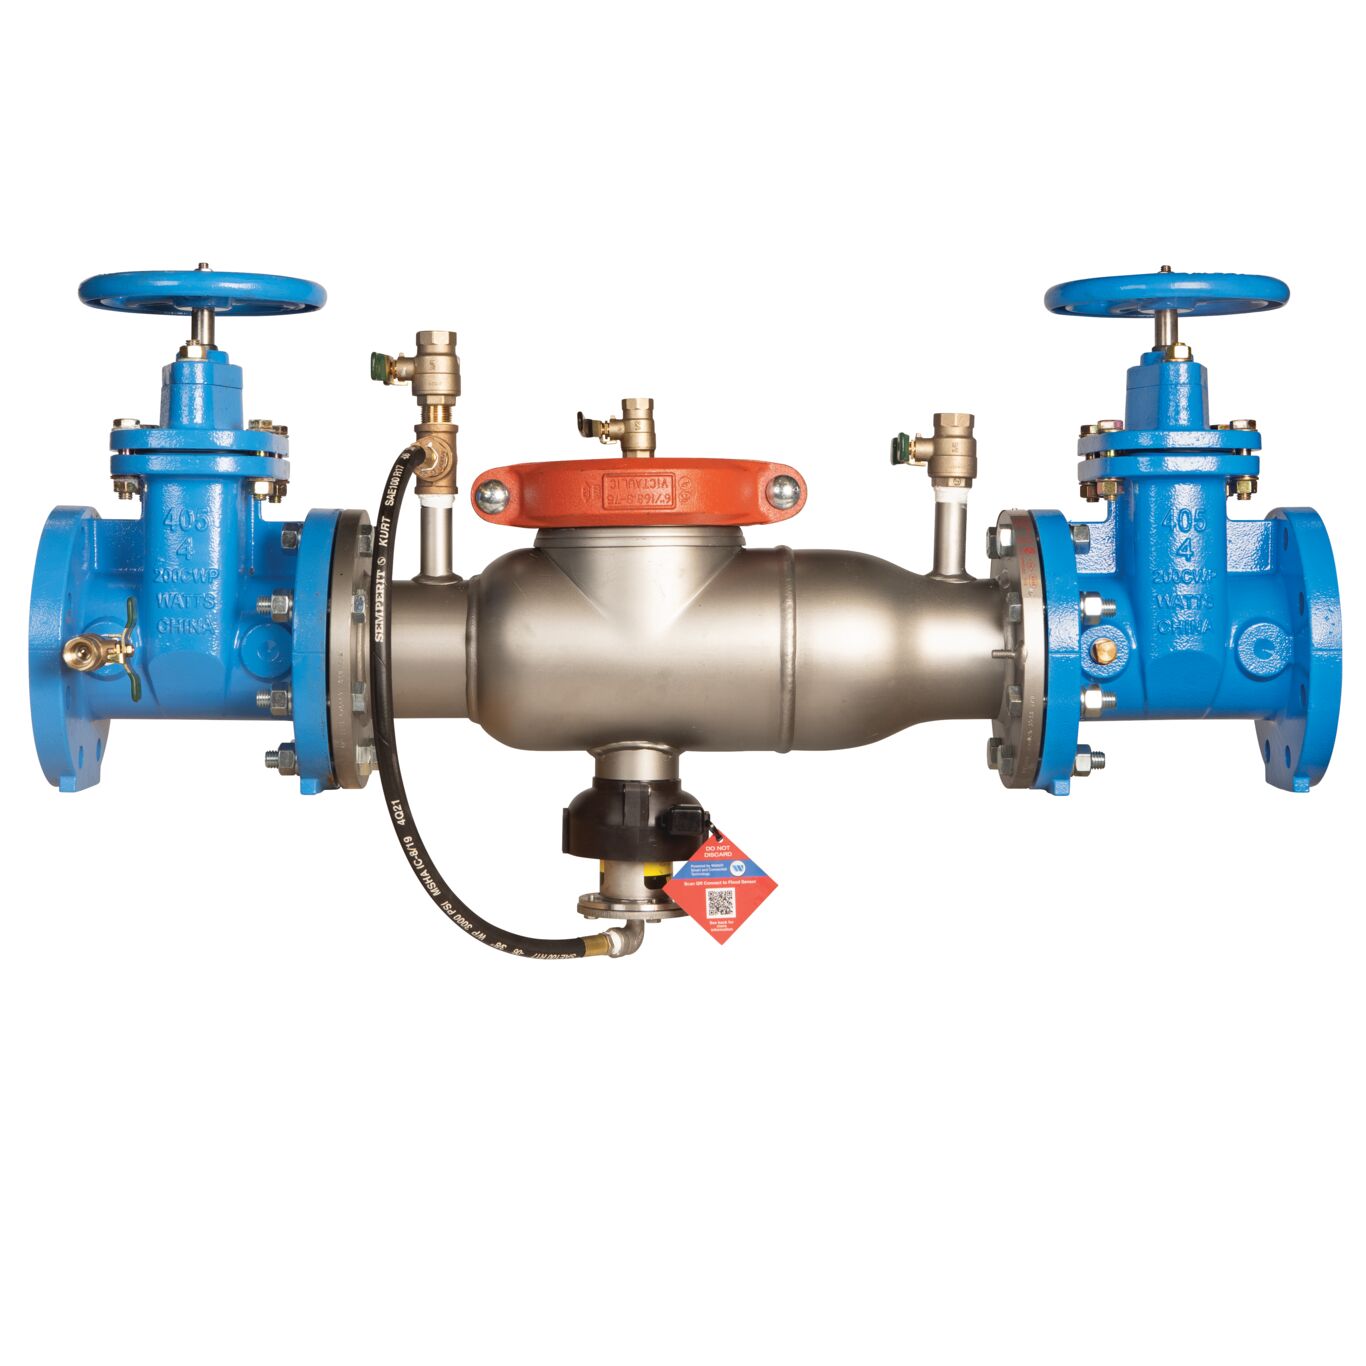 Reduced Pressure Zone Assembly Backflow Preventer, Stainless Steel, NRS Gates and Flood Sensor